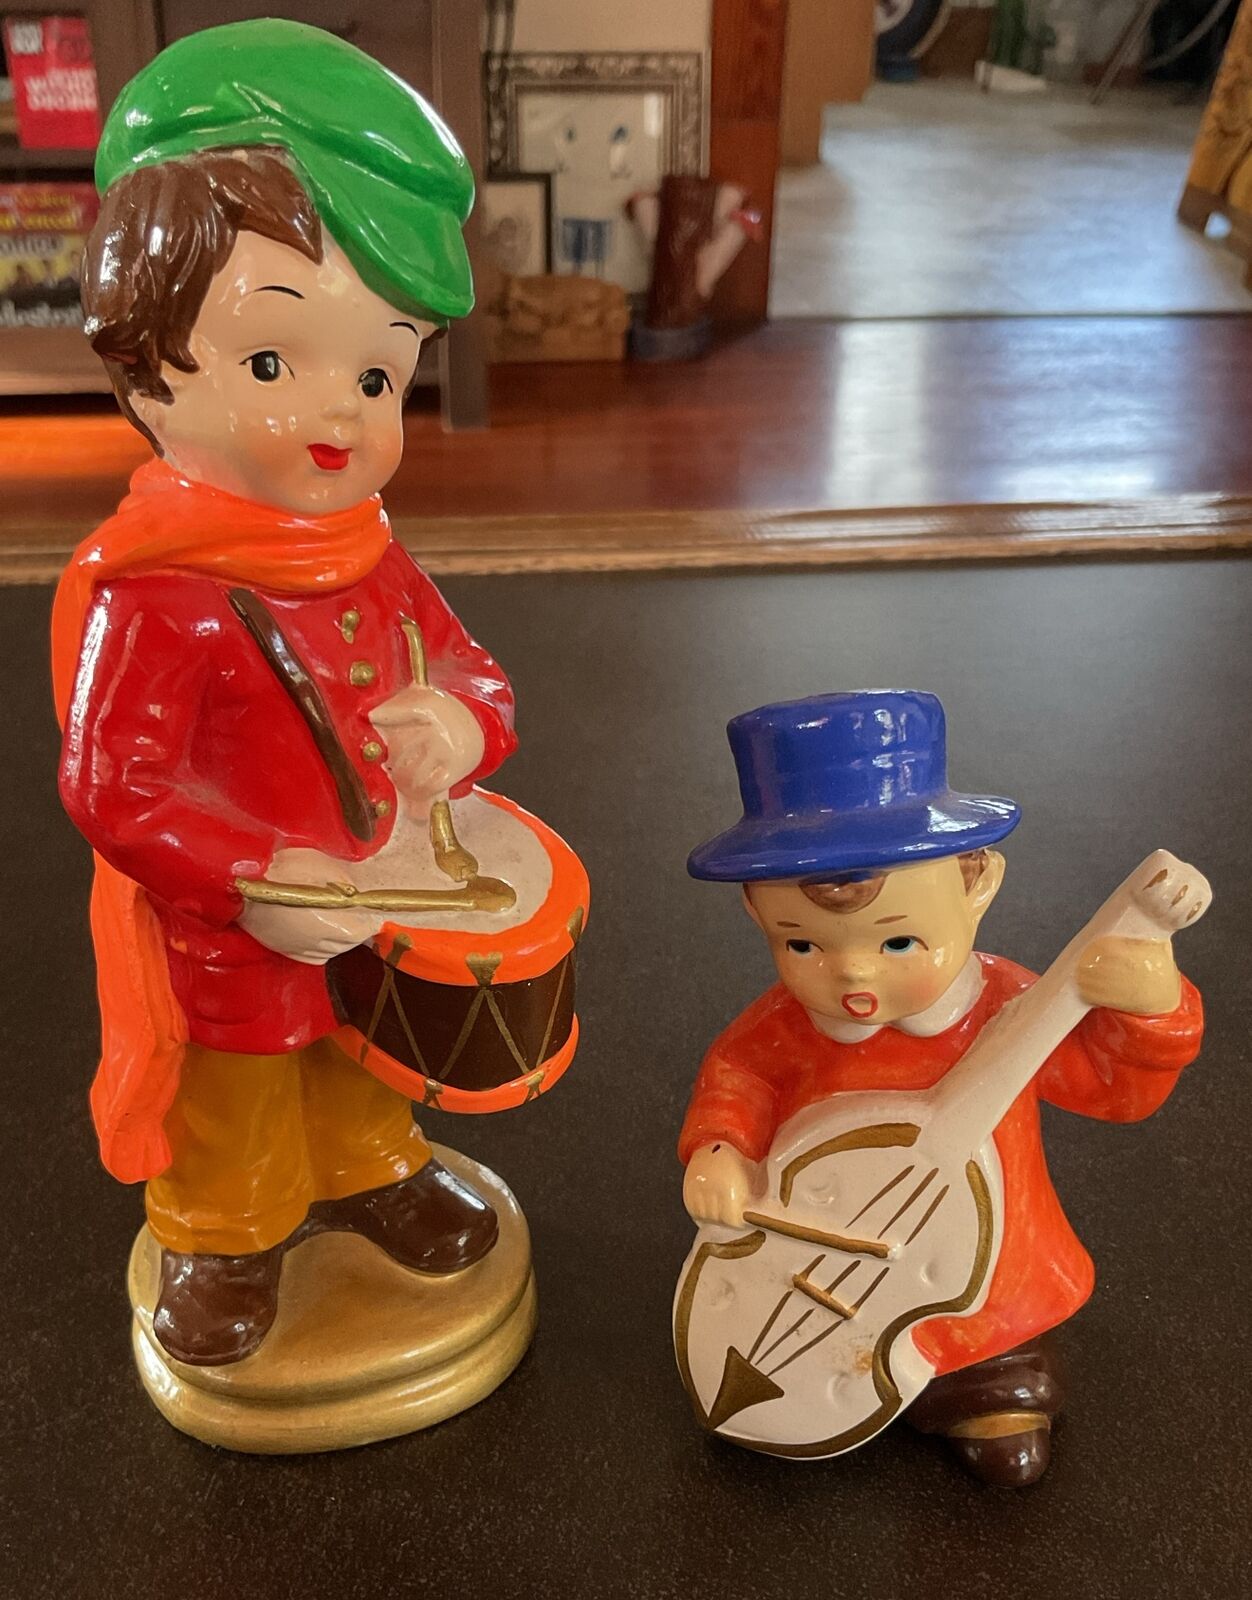 2 Vintage Porcelain Musician Figurines - Little Band Of Brothers